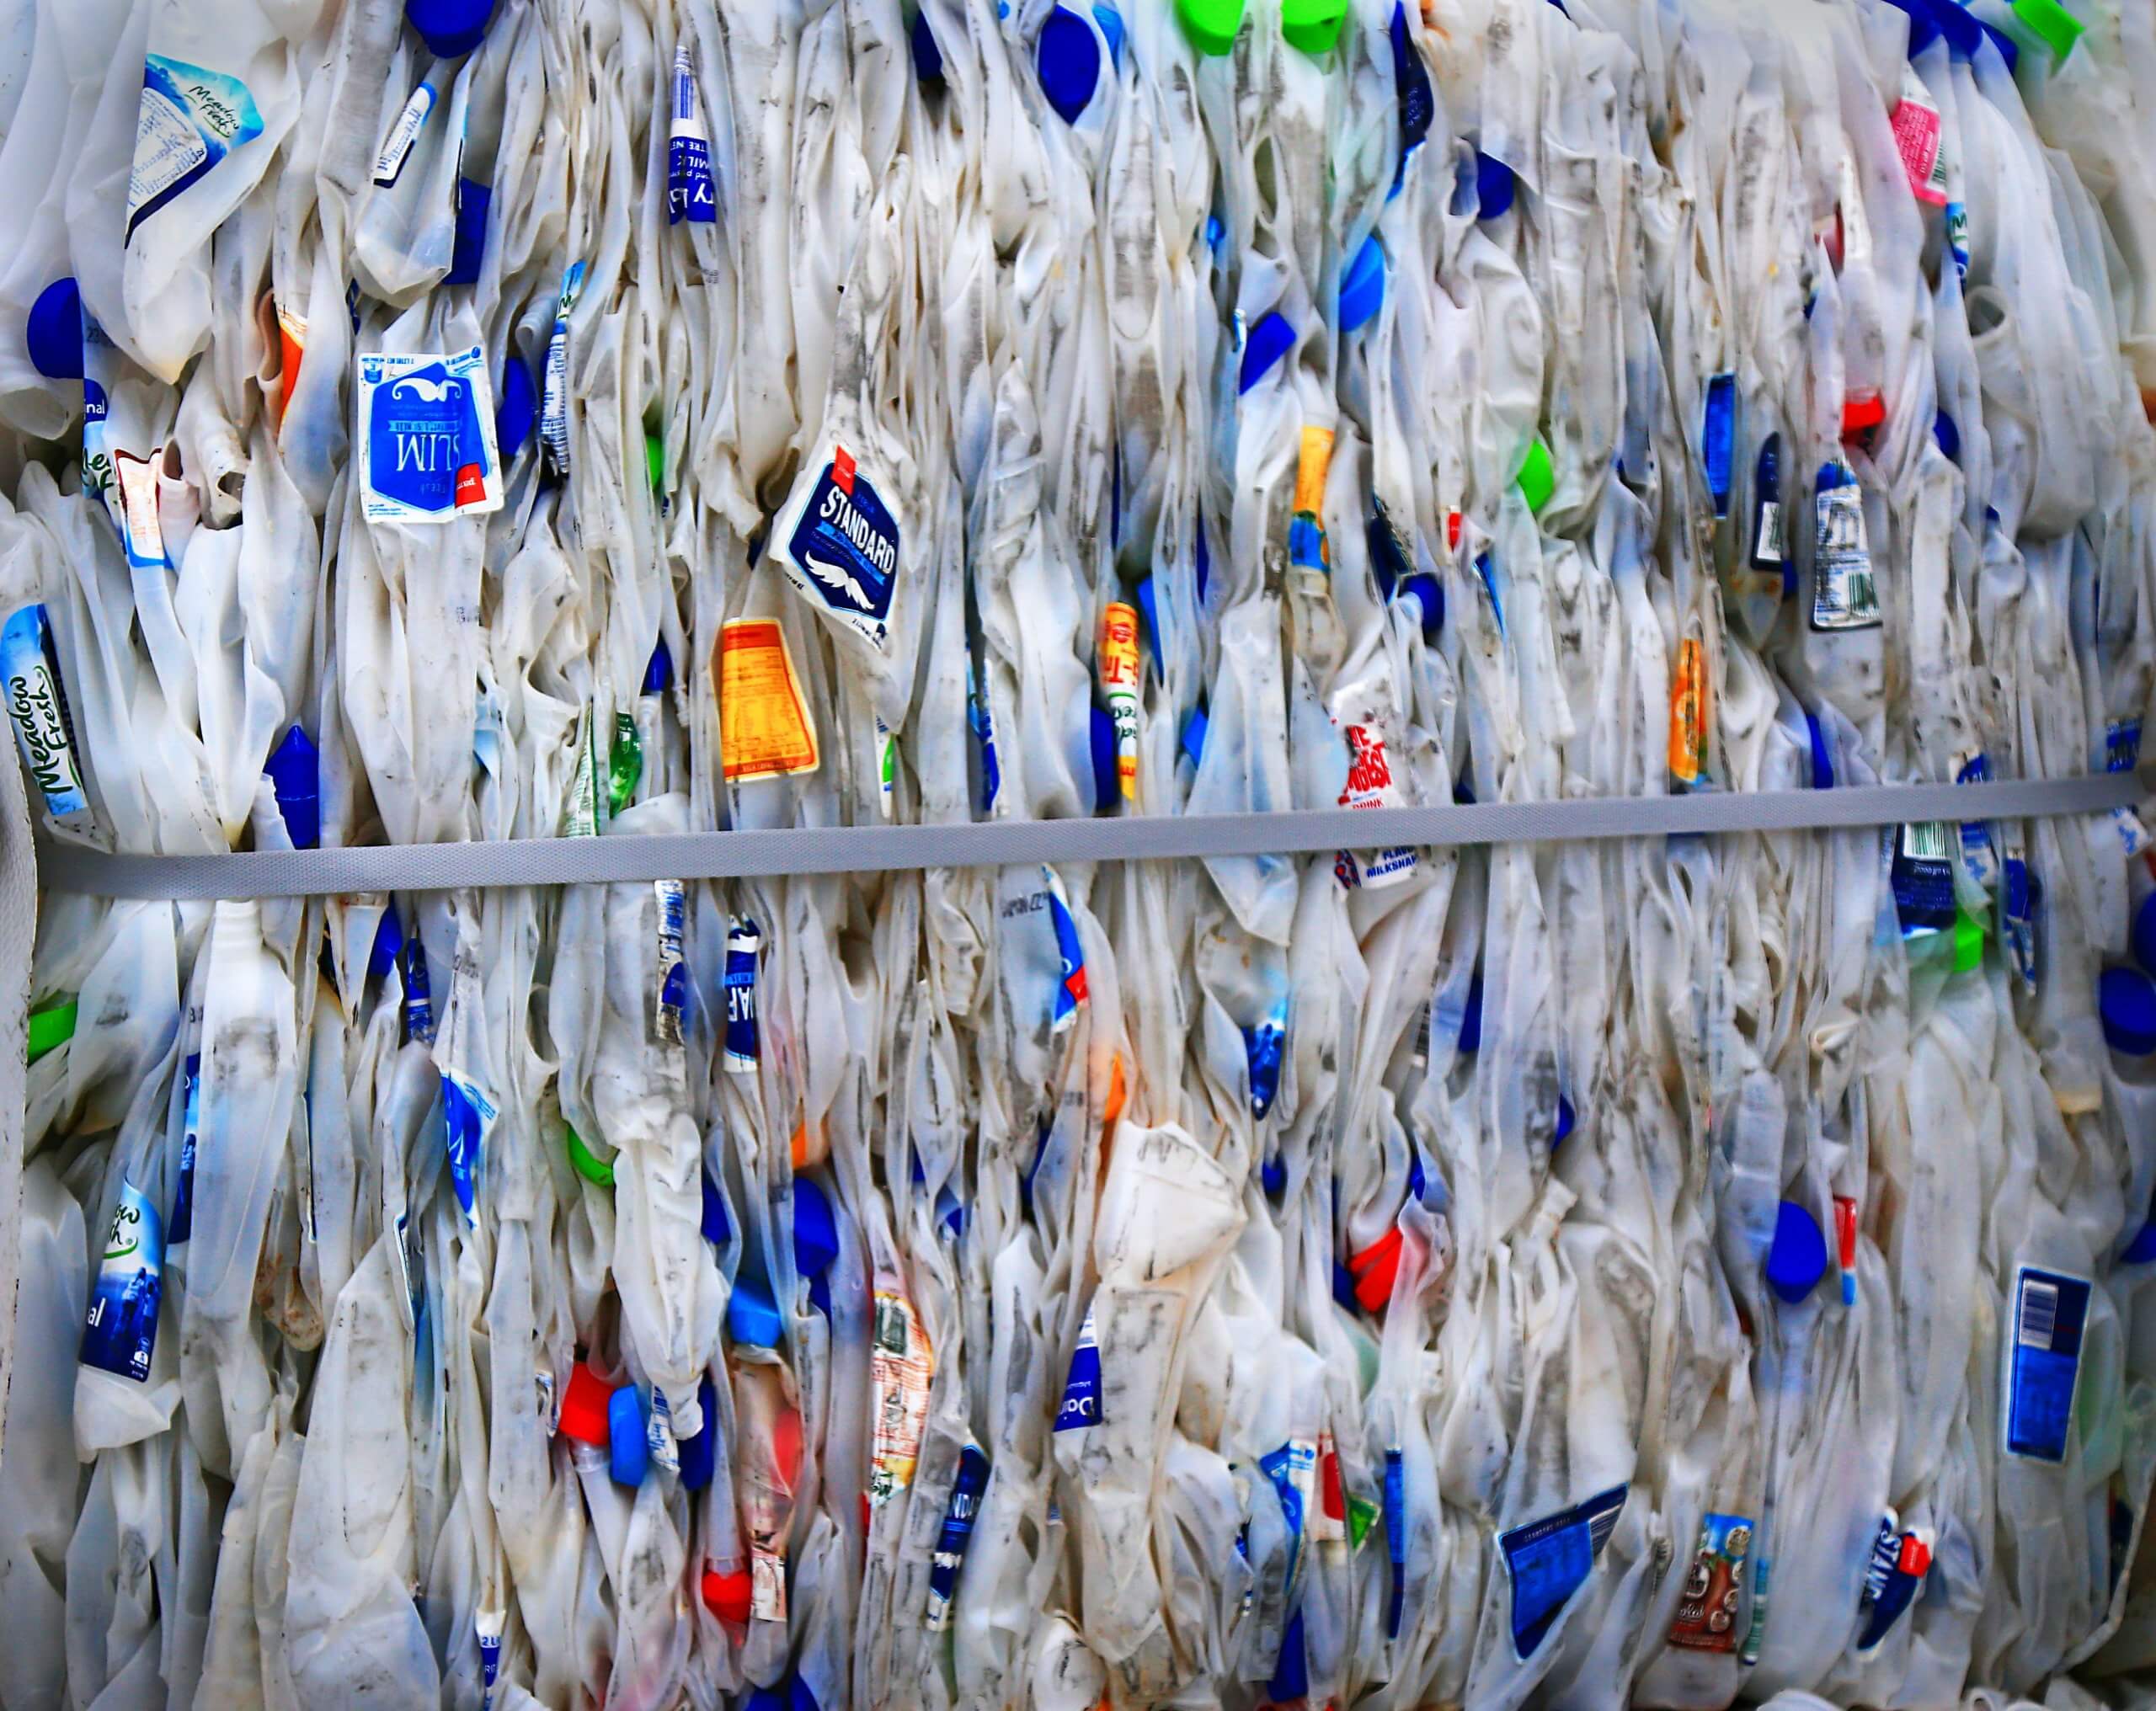 Israel produces 1.37 million tons of plastic waste per year; Our recycling volumes measure behind these huge numbers. Photo by Nareeta Martin on Unsplash